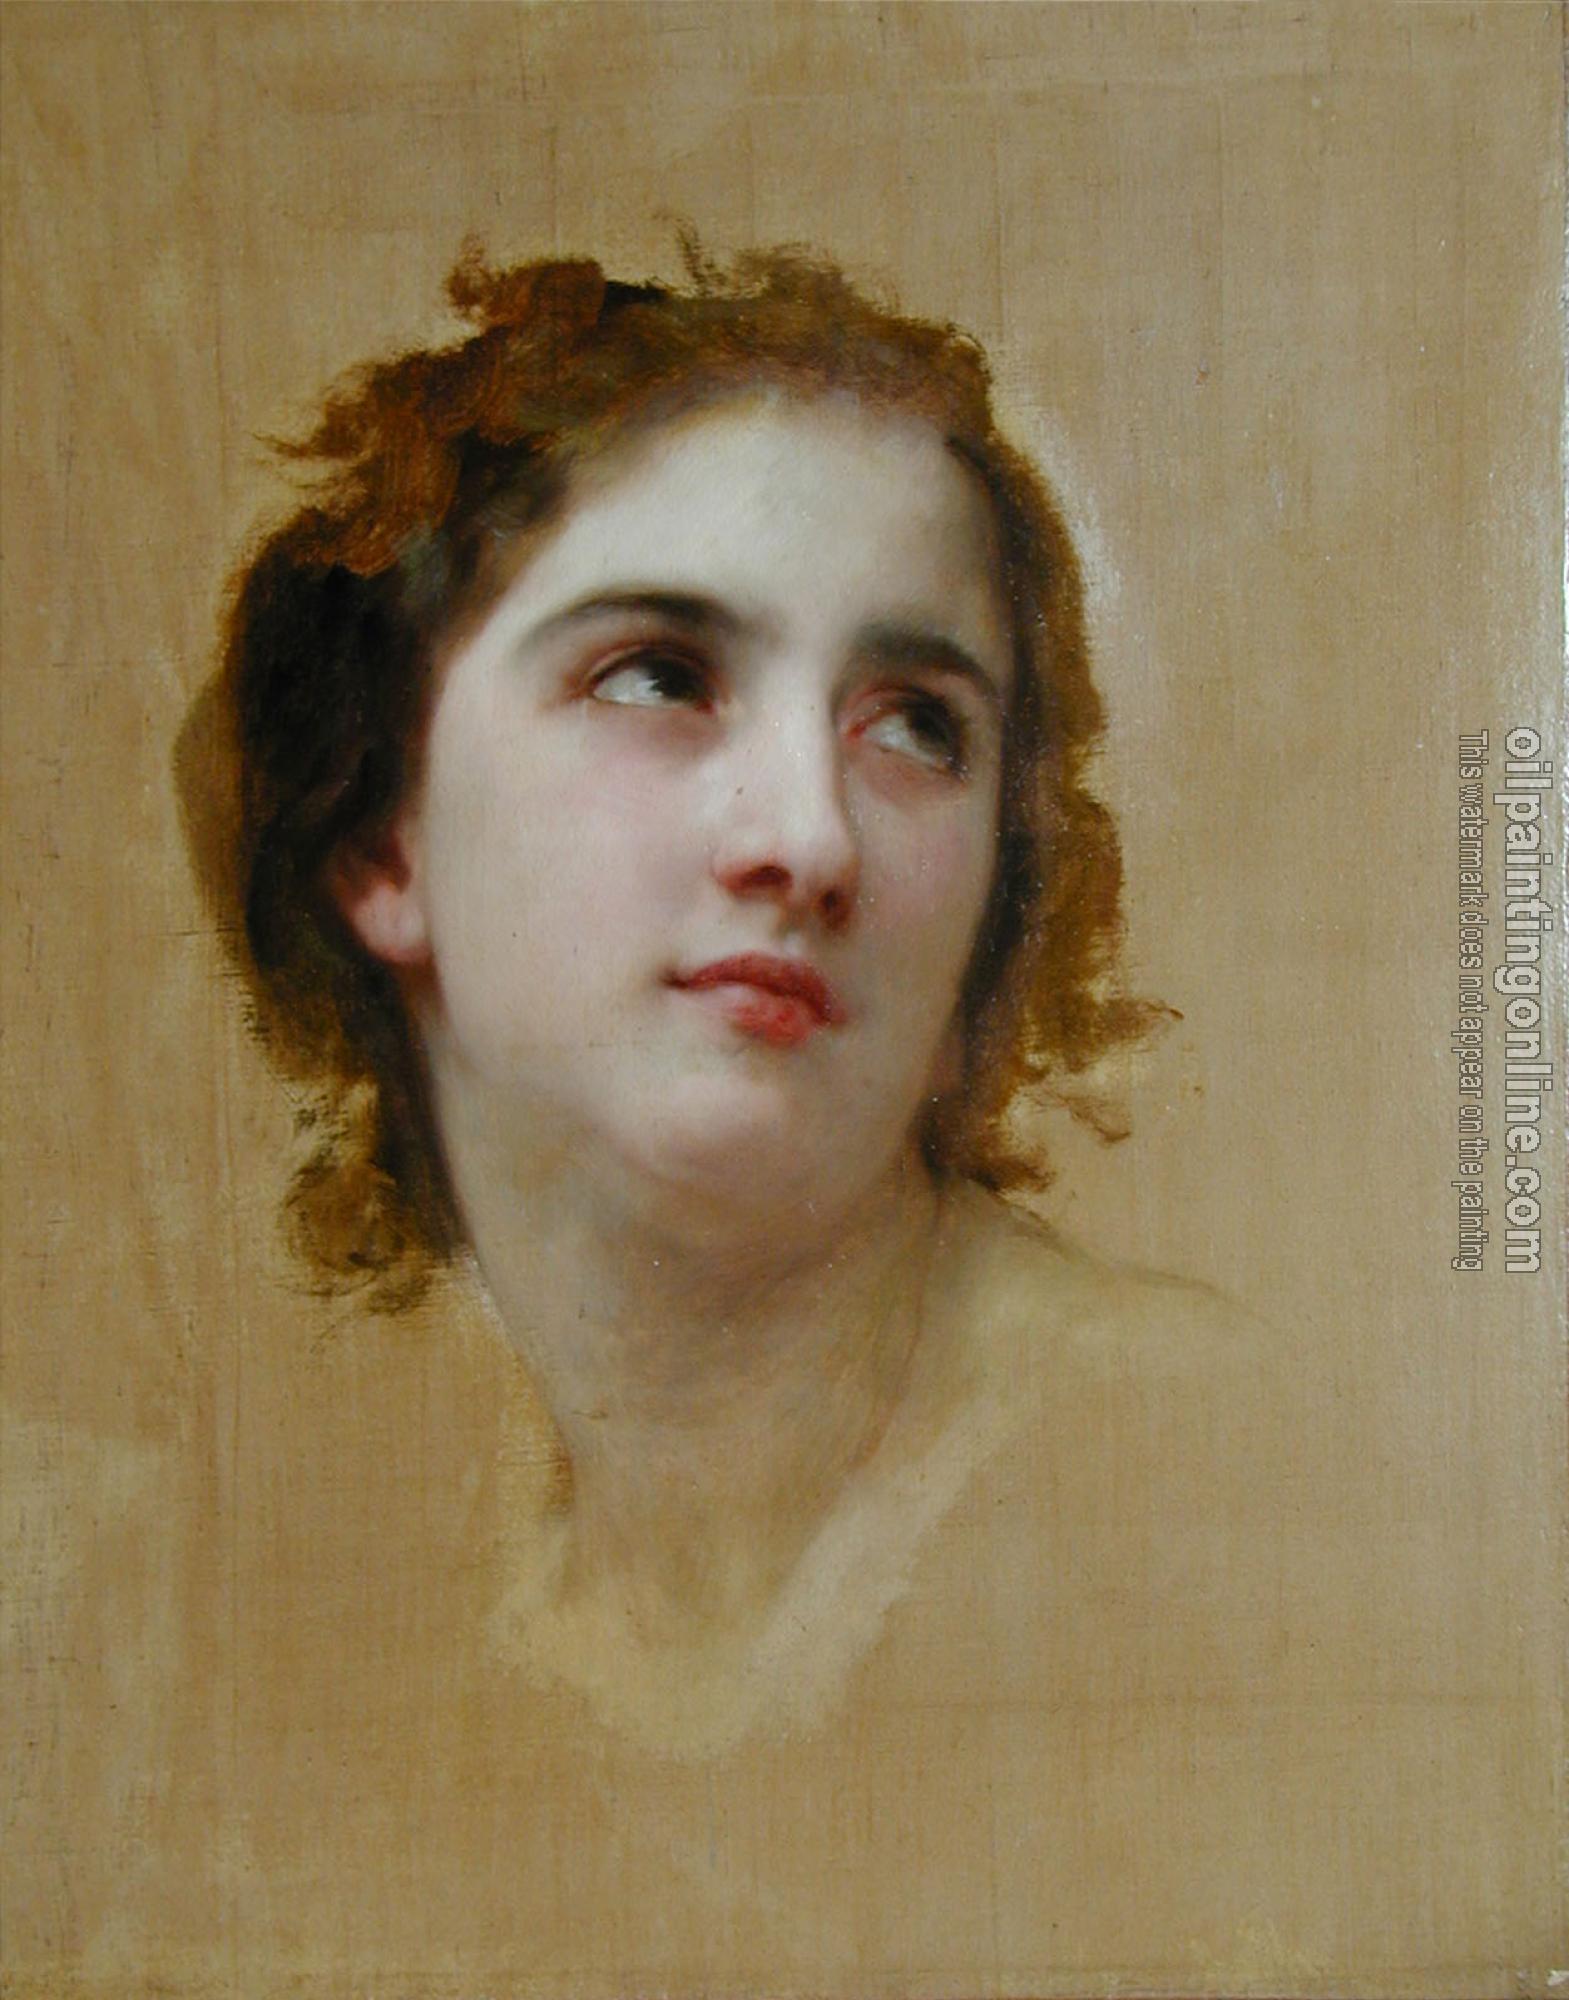 Bouguereau, William-Adolphe - Sketch of a Young Woman